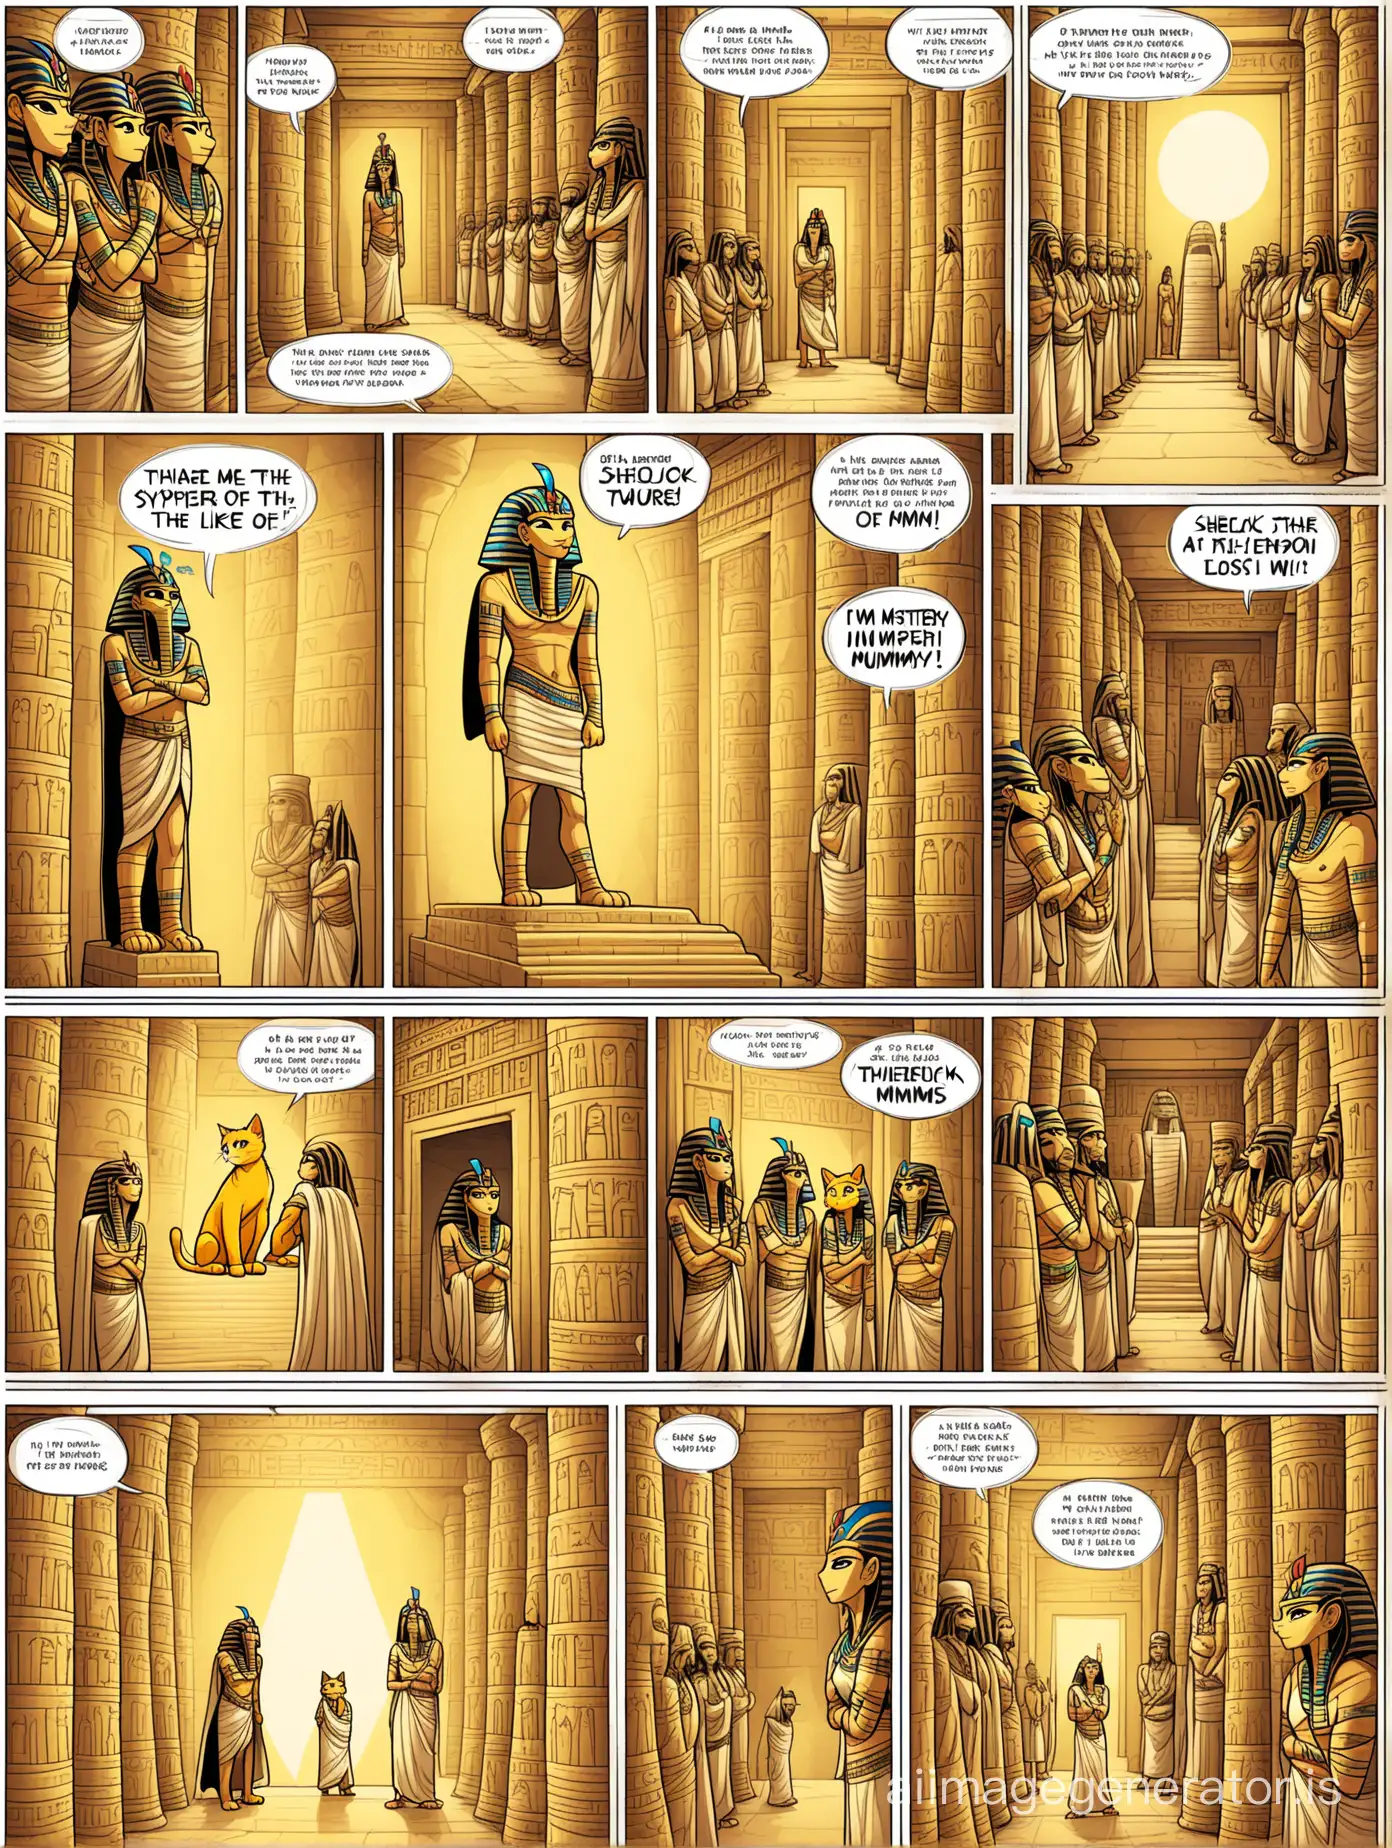 Mystery-of-the-Lost-Mummy-Enigmatic-Yellow-Cat-Detective-in-an-Egyptian-Temple